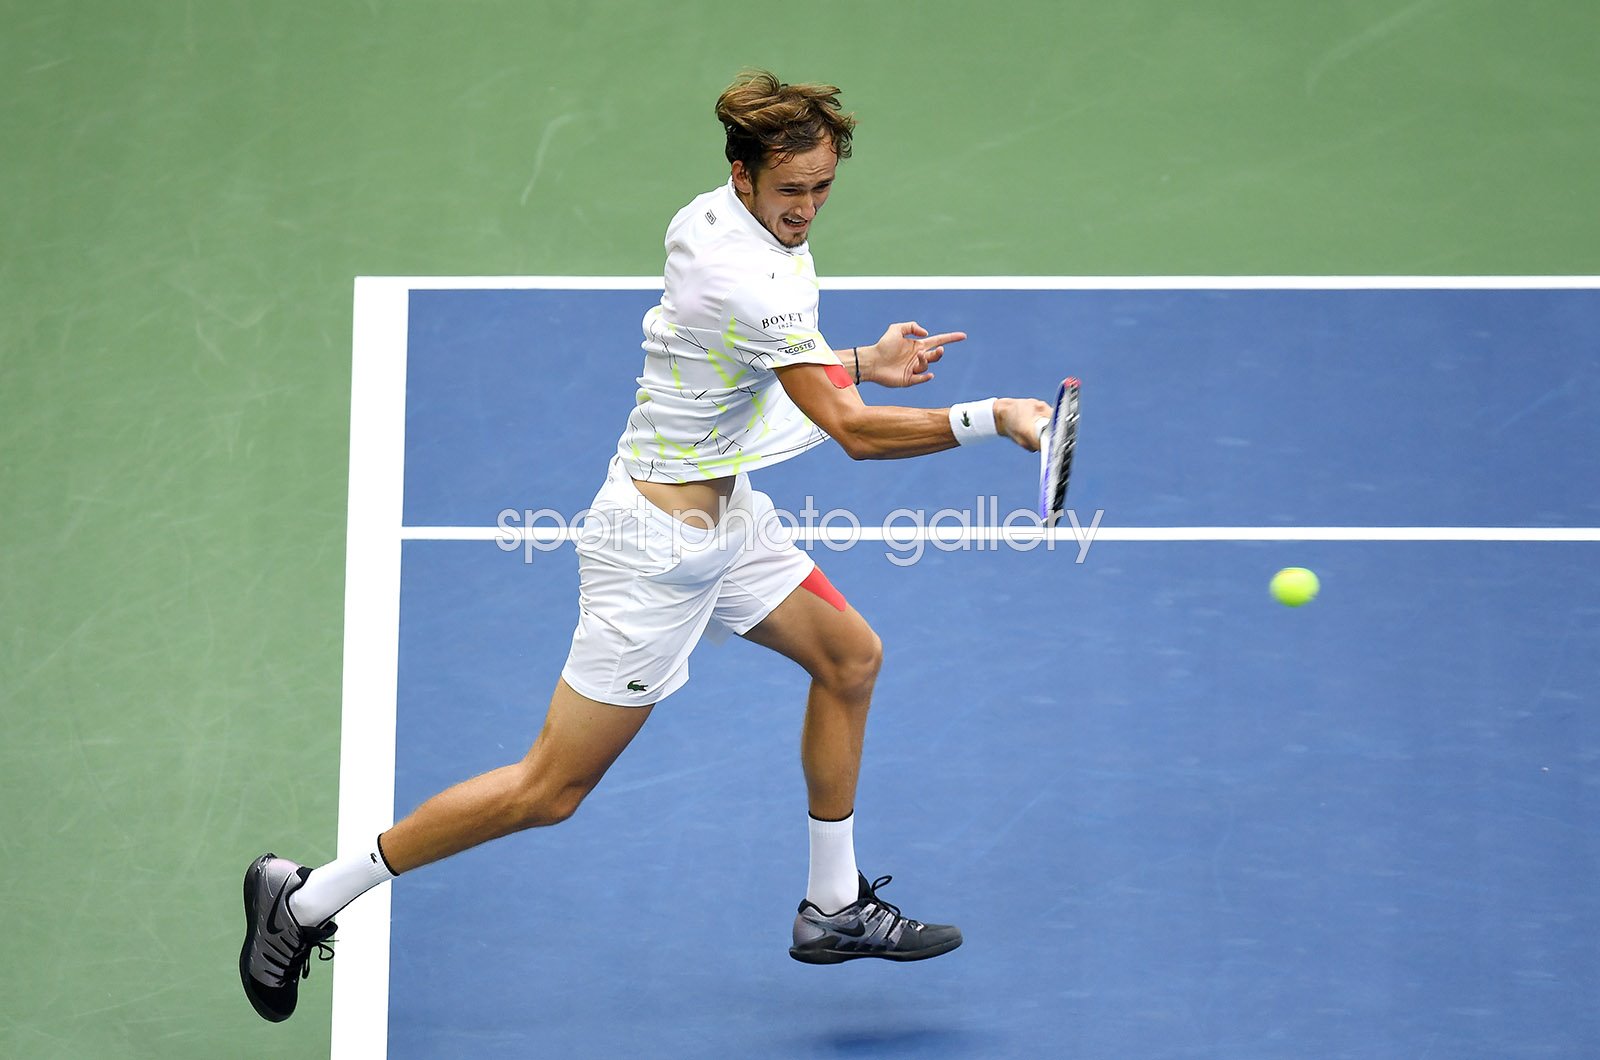 Daniil Medvedev Russia forehand US Open Final 2019 Images | Tennis Posters